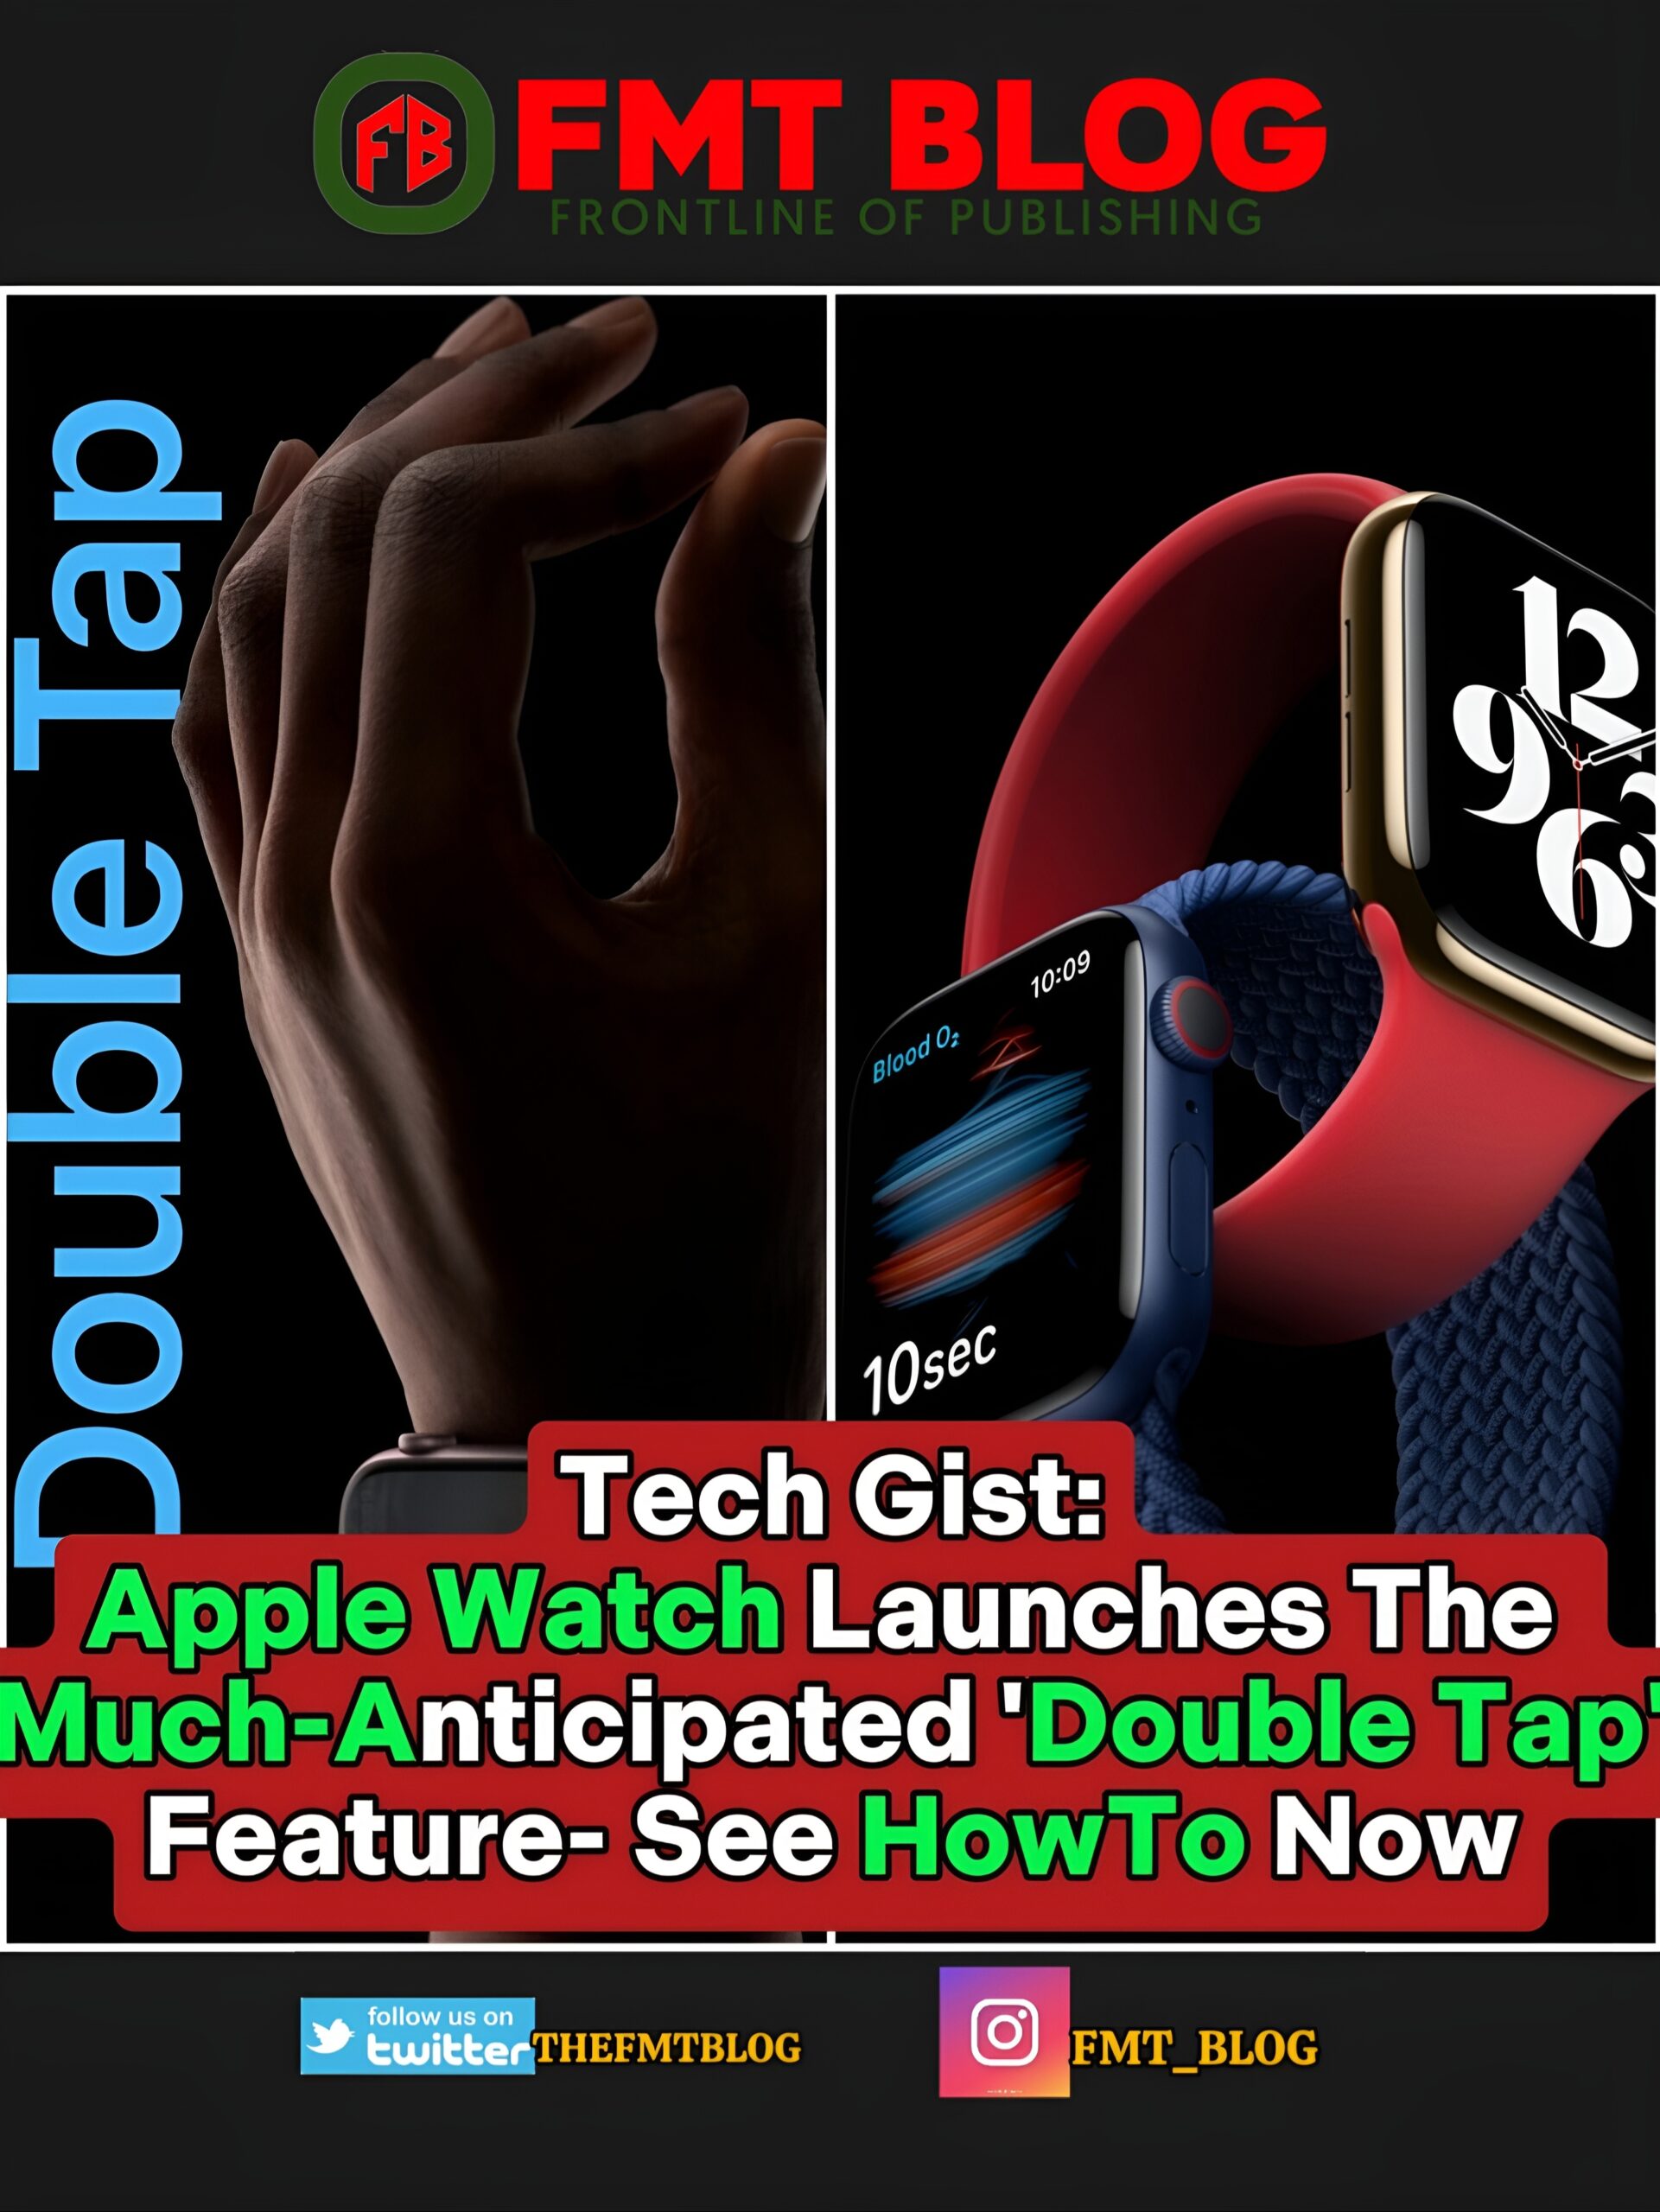 Apple Watch Launches The Much-Anticipated “Double Tap” Feature- See How To Now